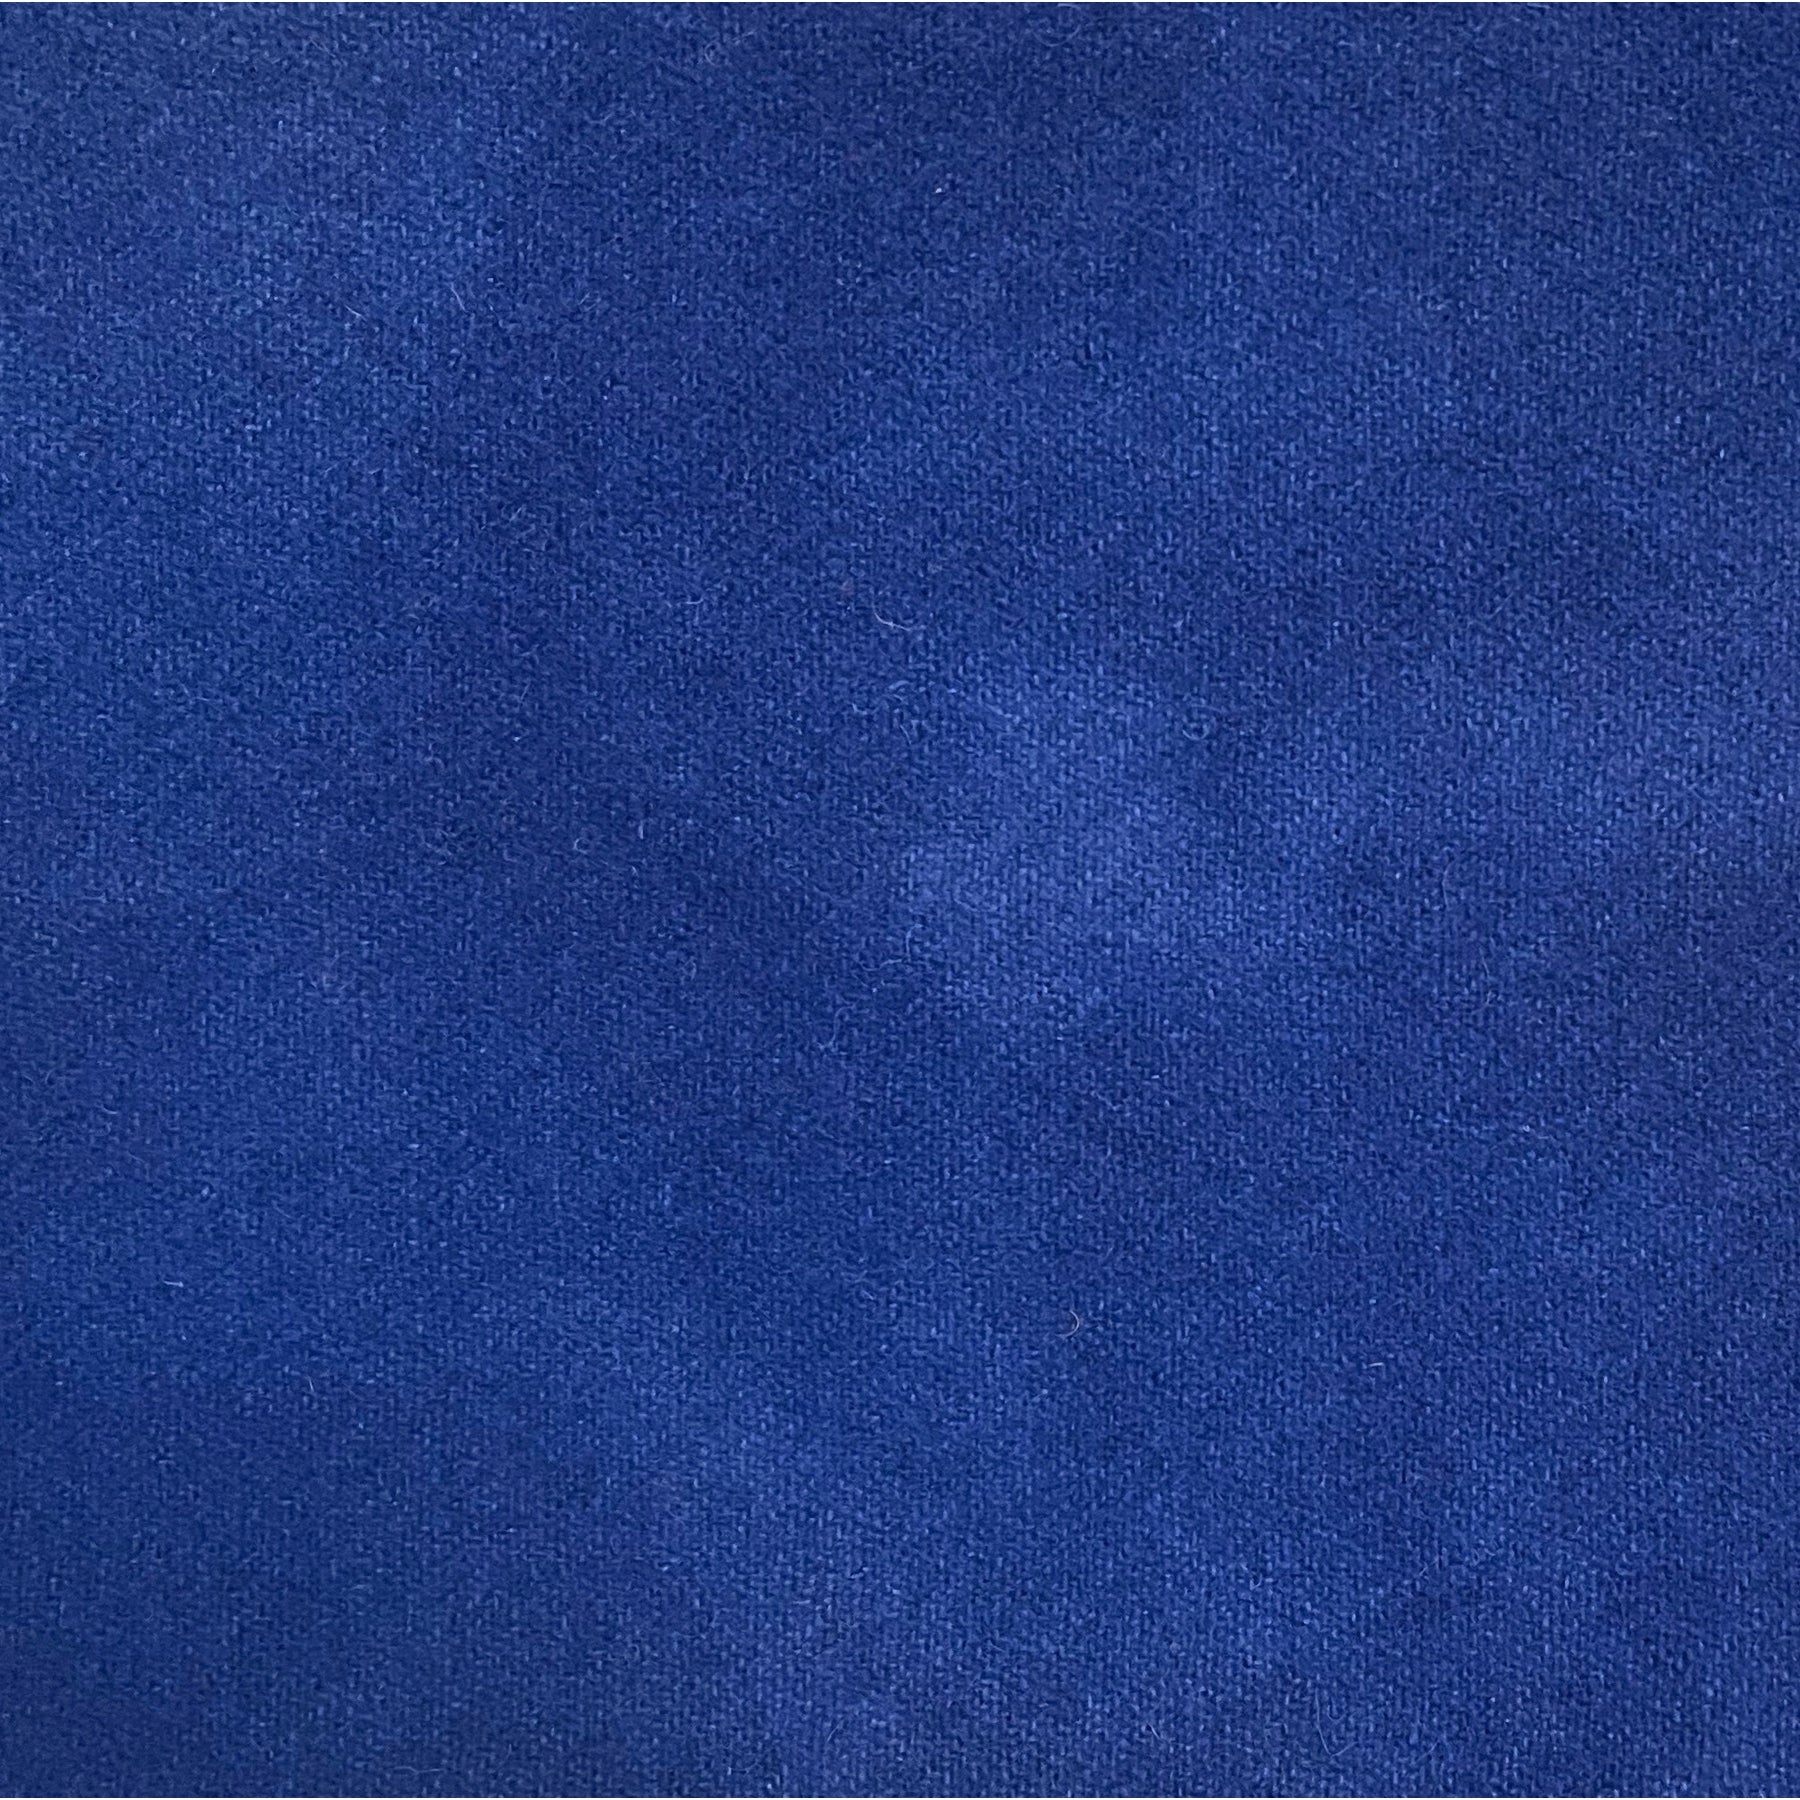 Royal Blue - Colorama Hand Dyed Wool - Offered by HoneyBee Hive Rug Hooking